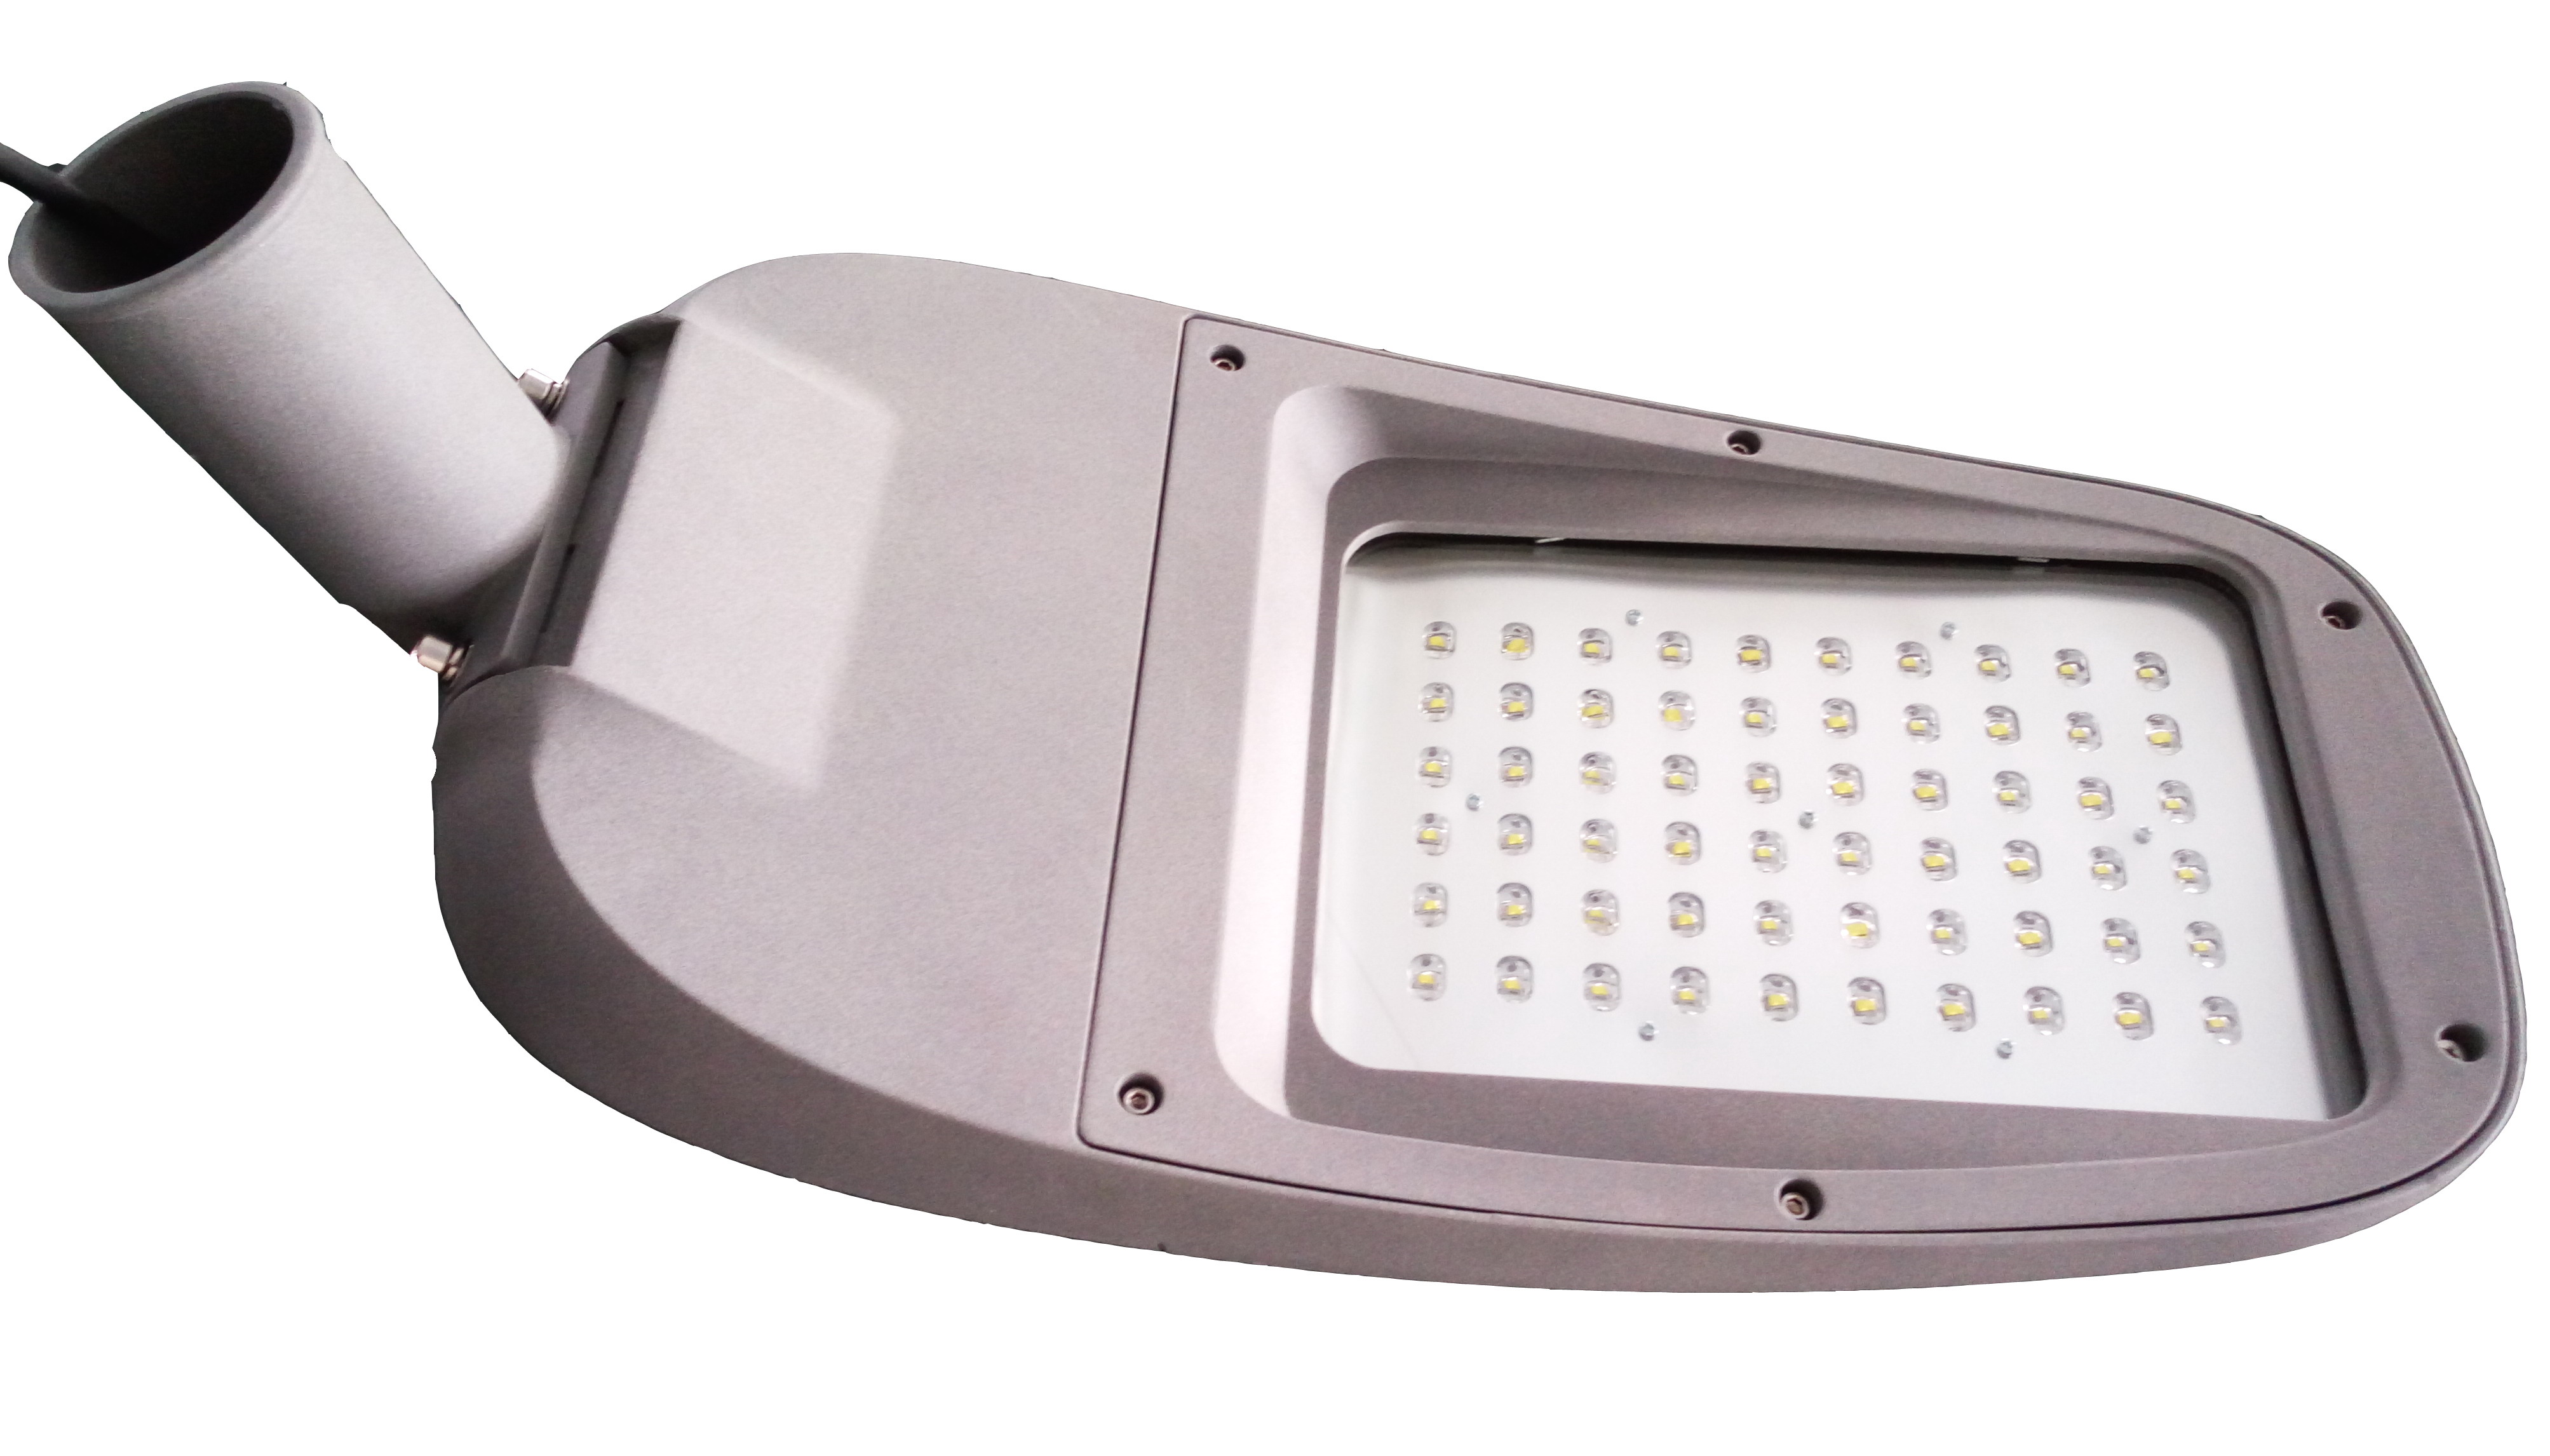 NEW patented design LED street lamp 30w-120w 5 years warranty CREE LED WITH MEANWELL DRIVER